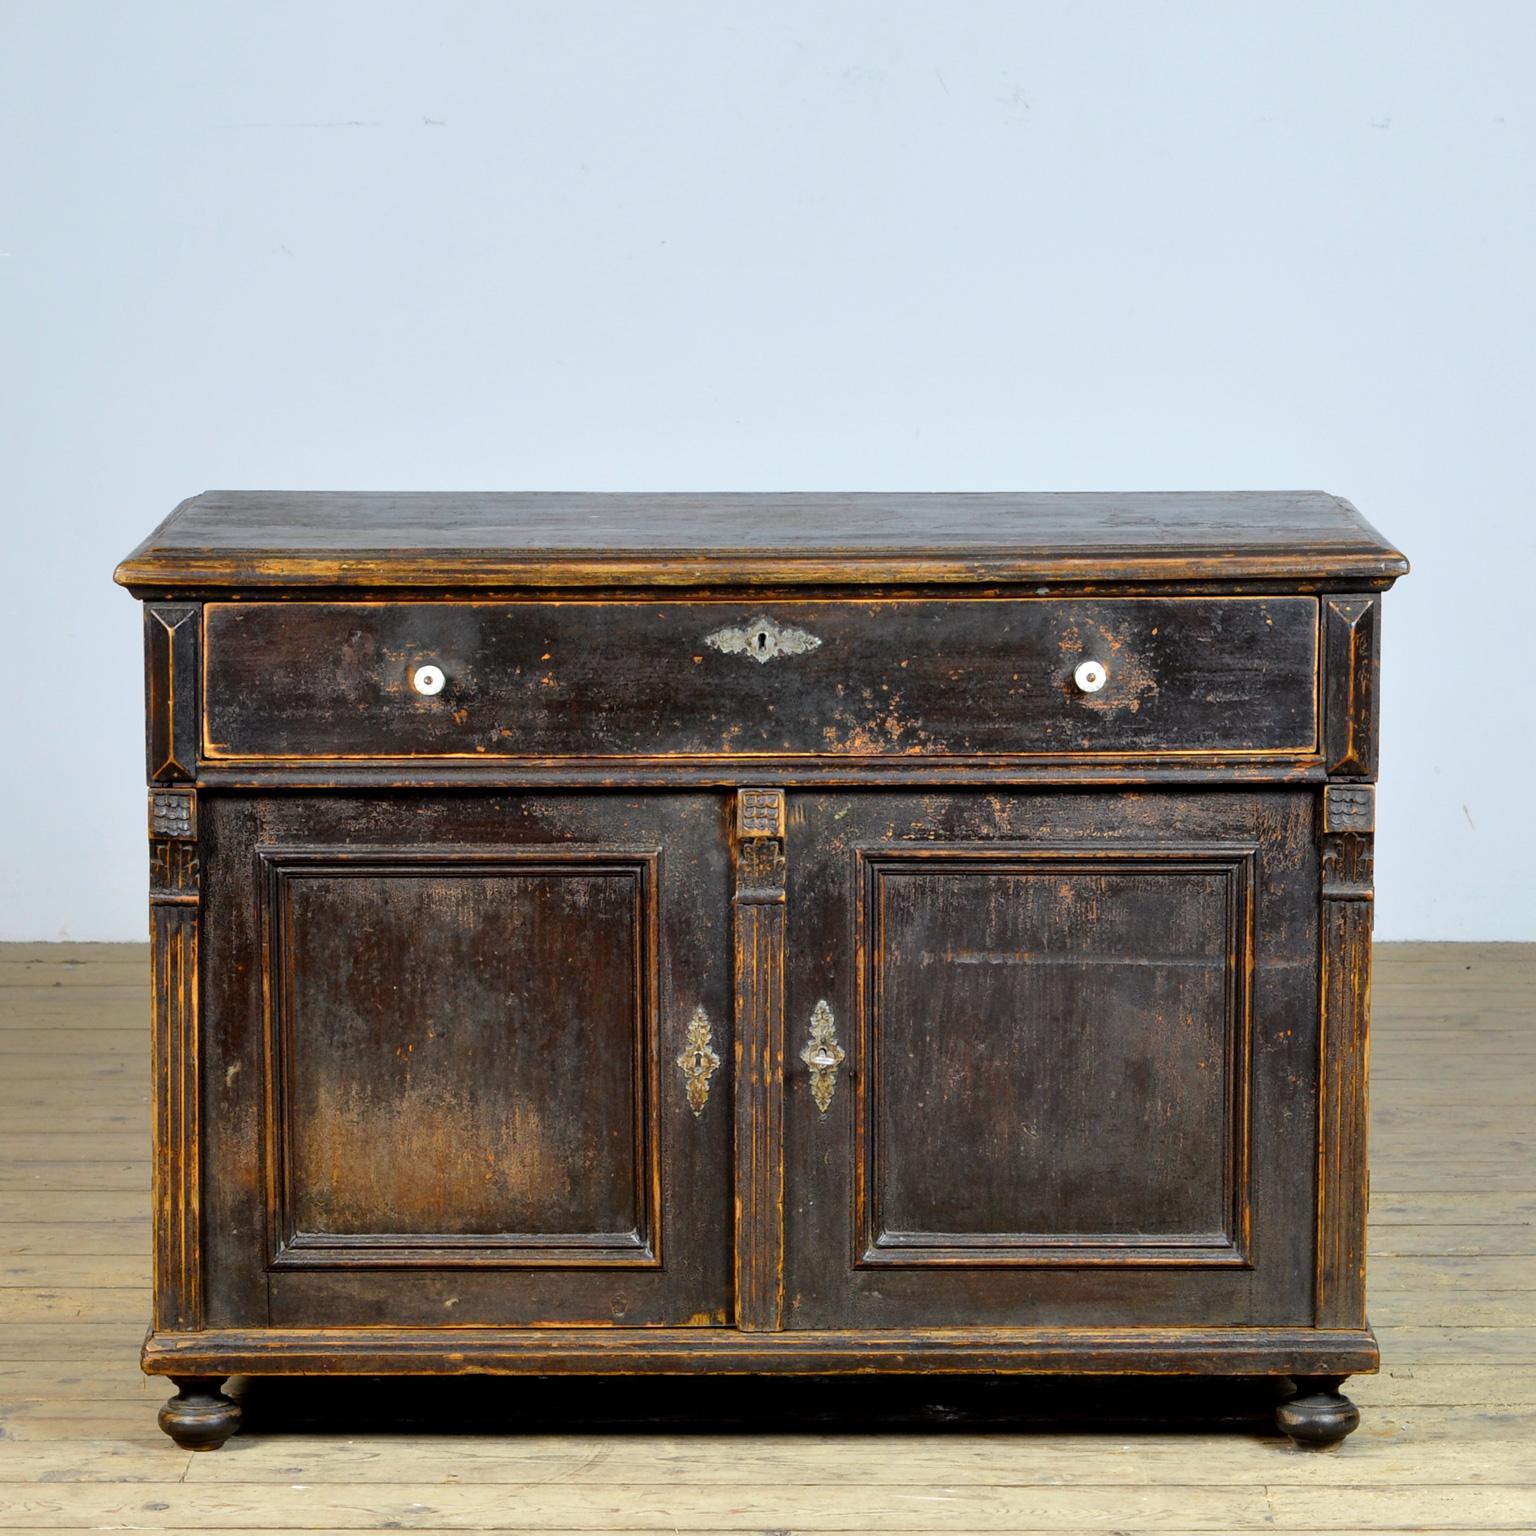 Beautiful wooden sideboard from circa 1920. Made of pine. The case has its original paint with a nice patina. Beautiful frames on the doors and porcelain knobs on the drawer. The cabinet has a well-functioning lock with key. This cabinet has been